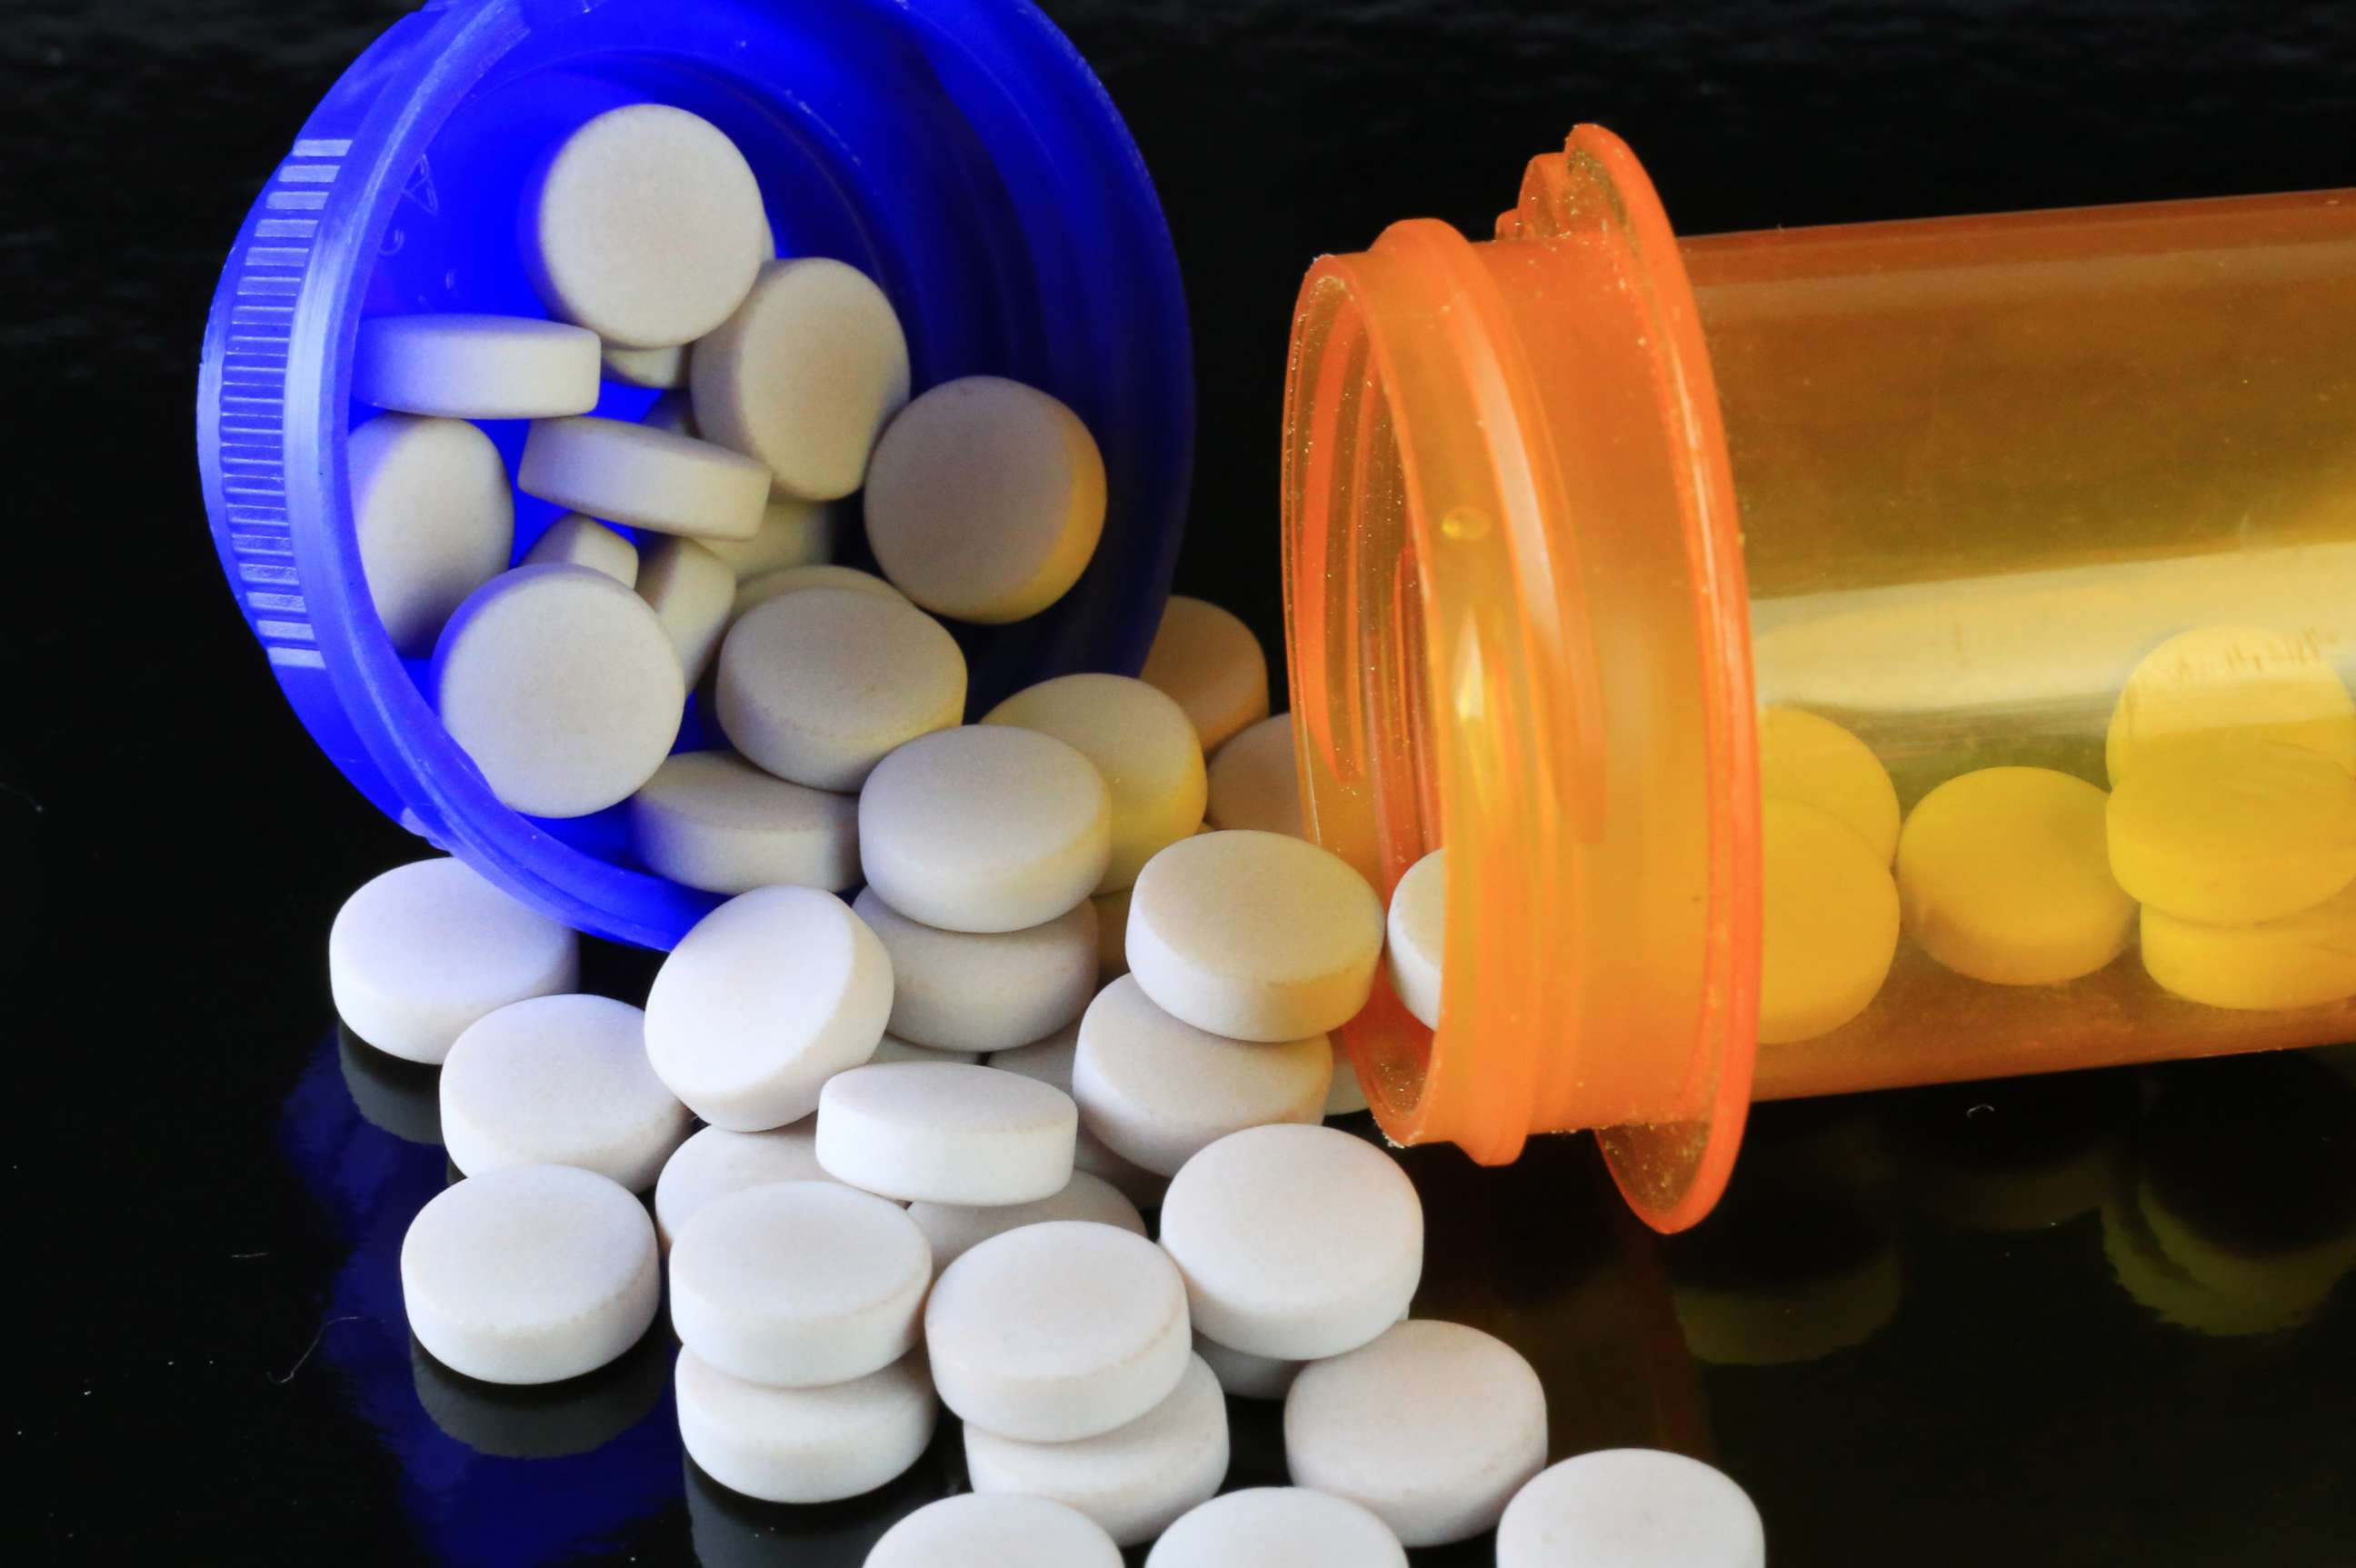 PHOTO: Stock photo of pills and a prescription bottle.